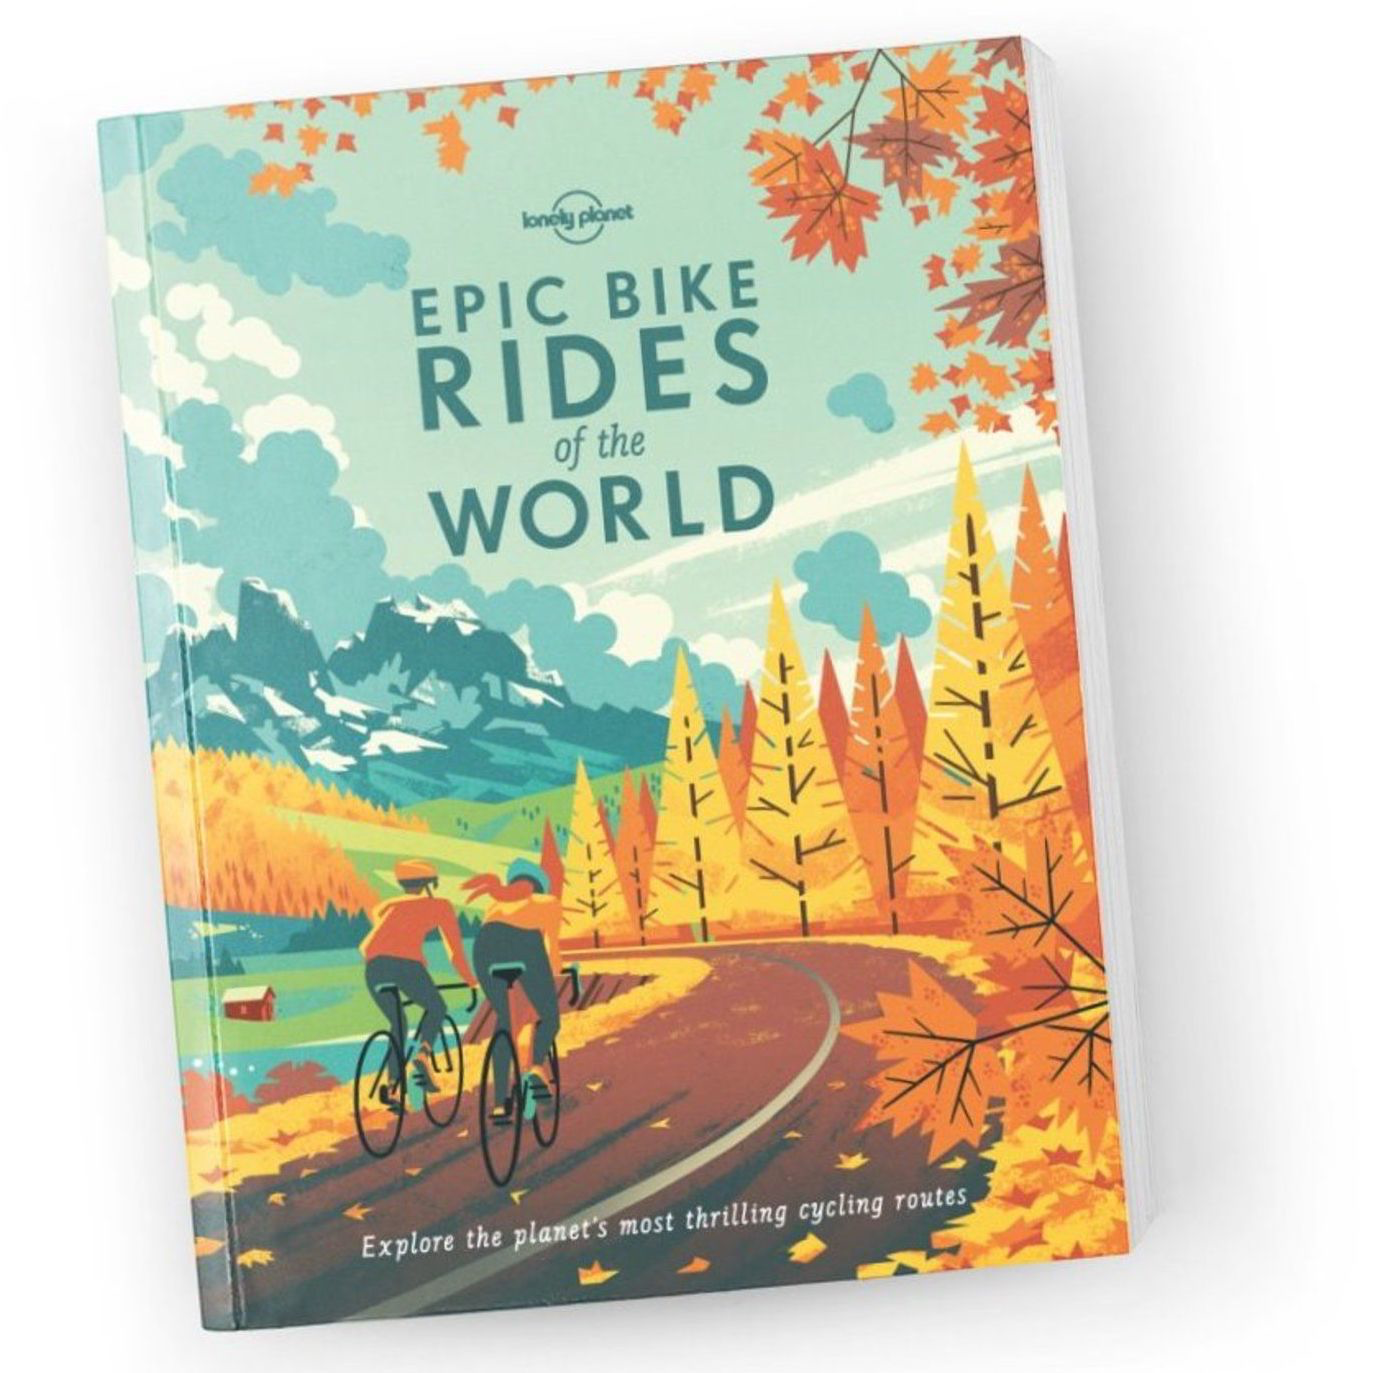 AEpic bike Rides of the World book from Lonely Planetlt